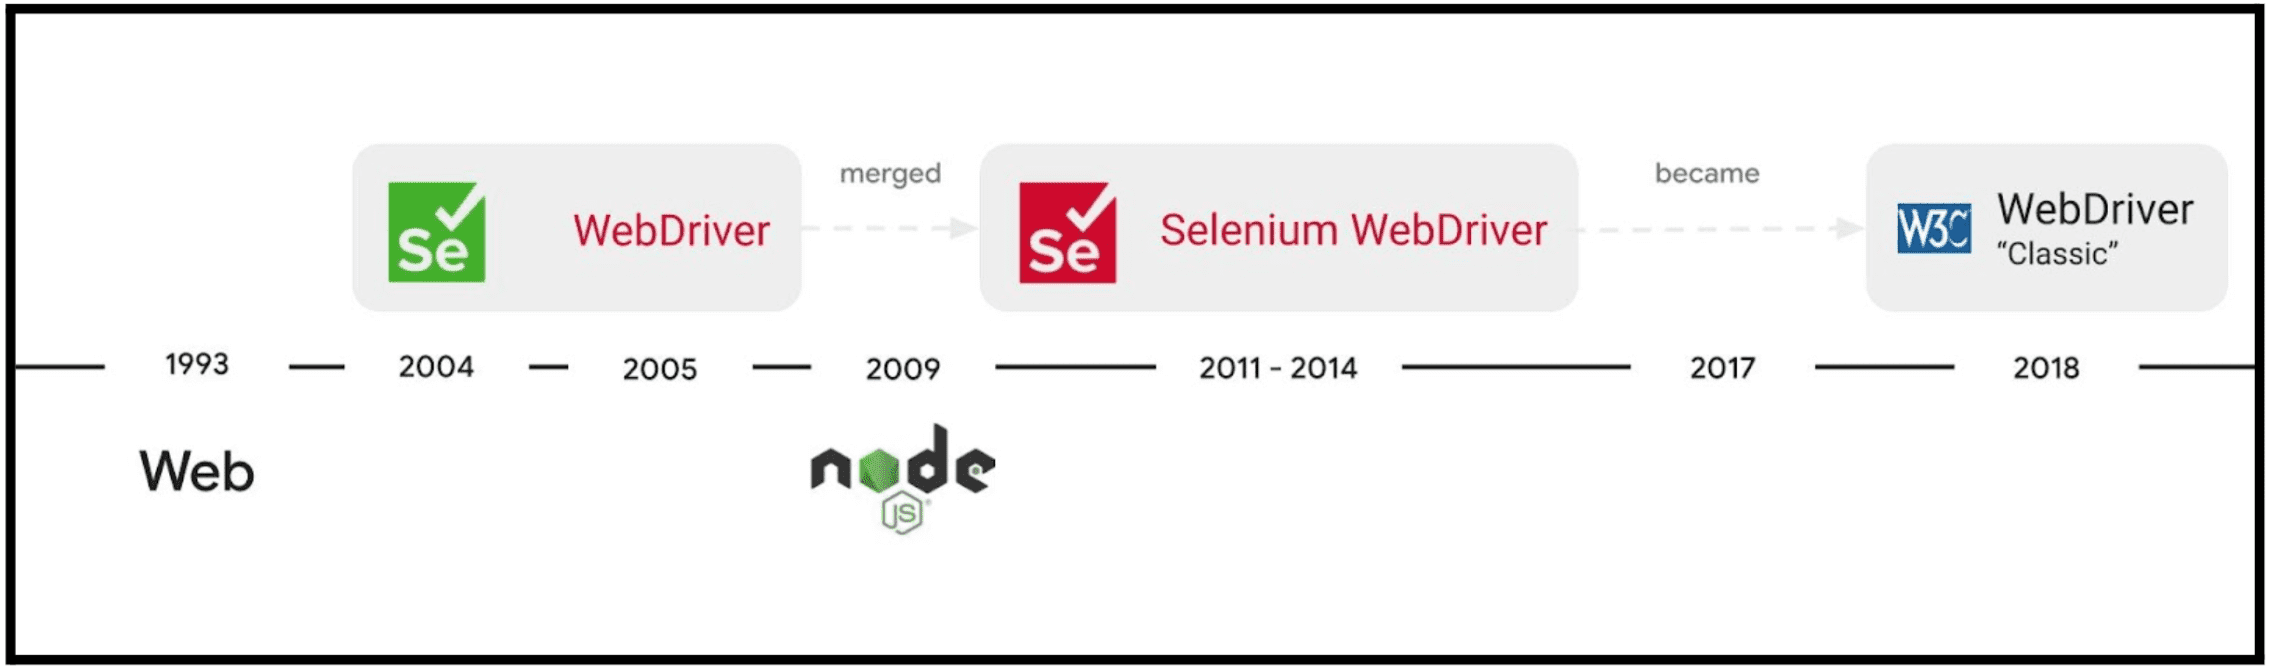 The evolution of the Selenium WebDriver project.